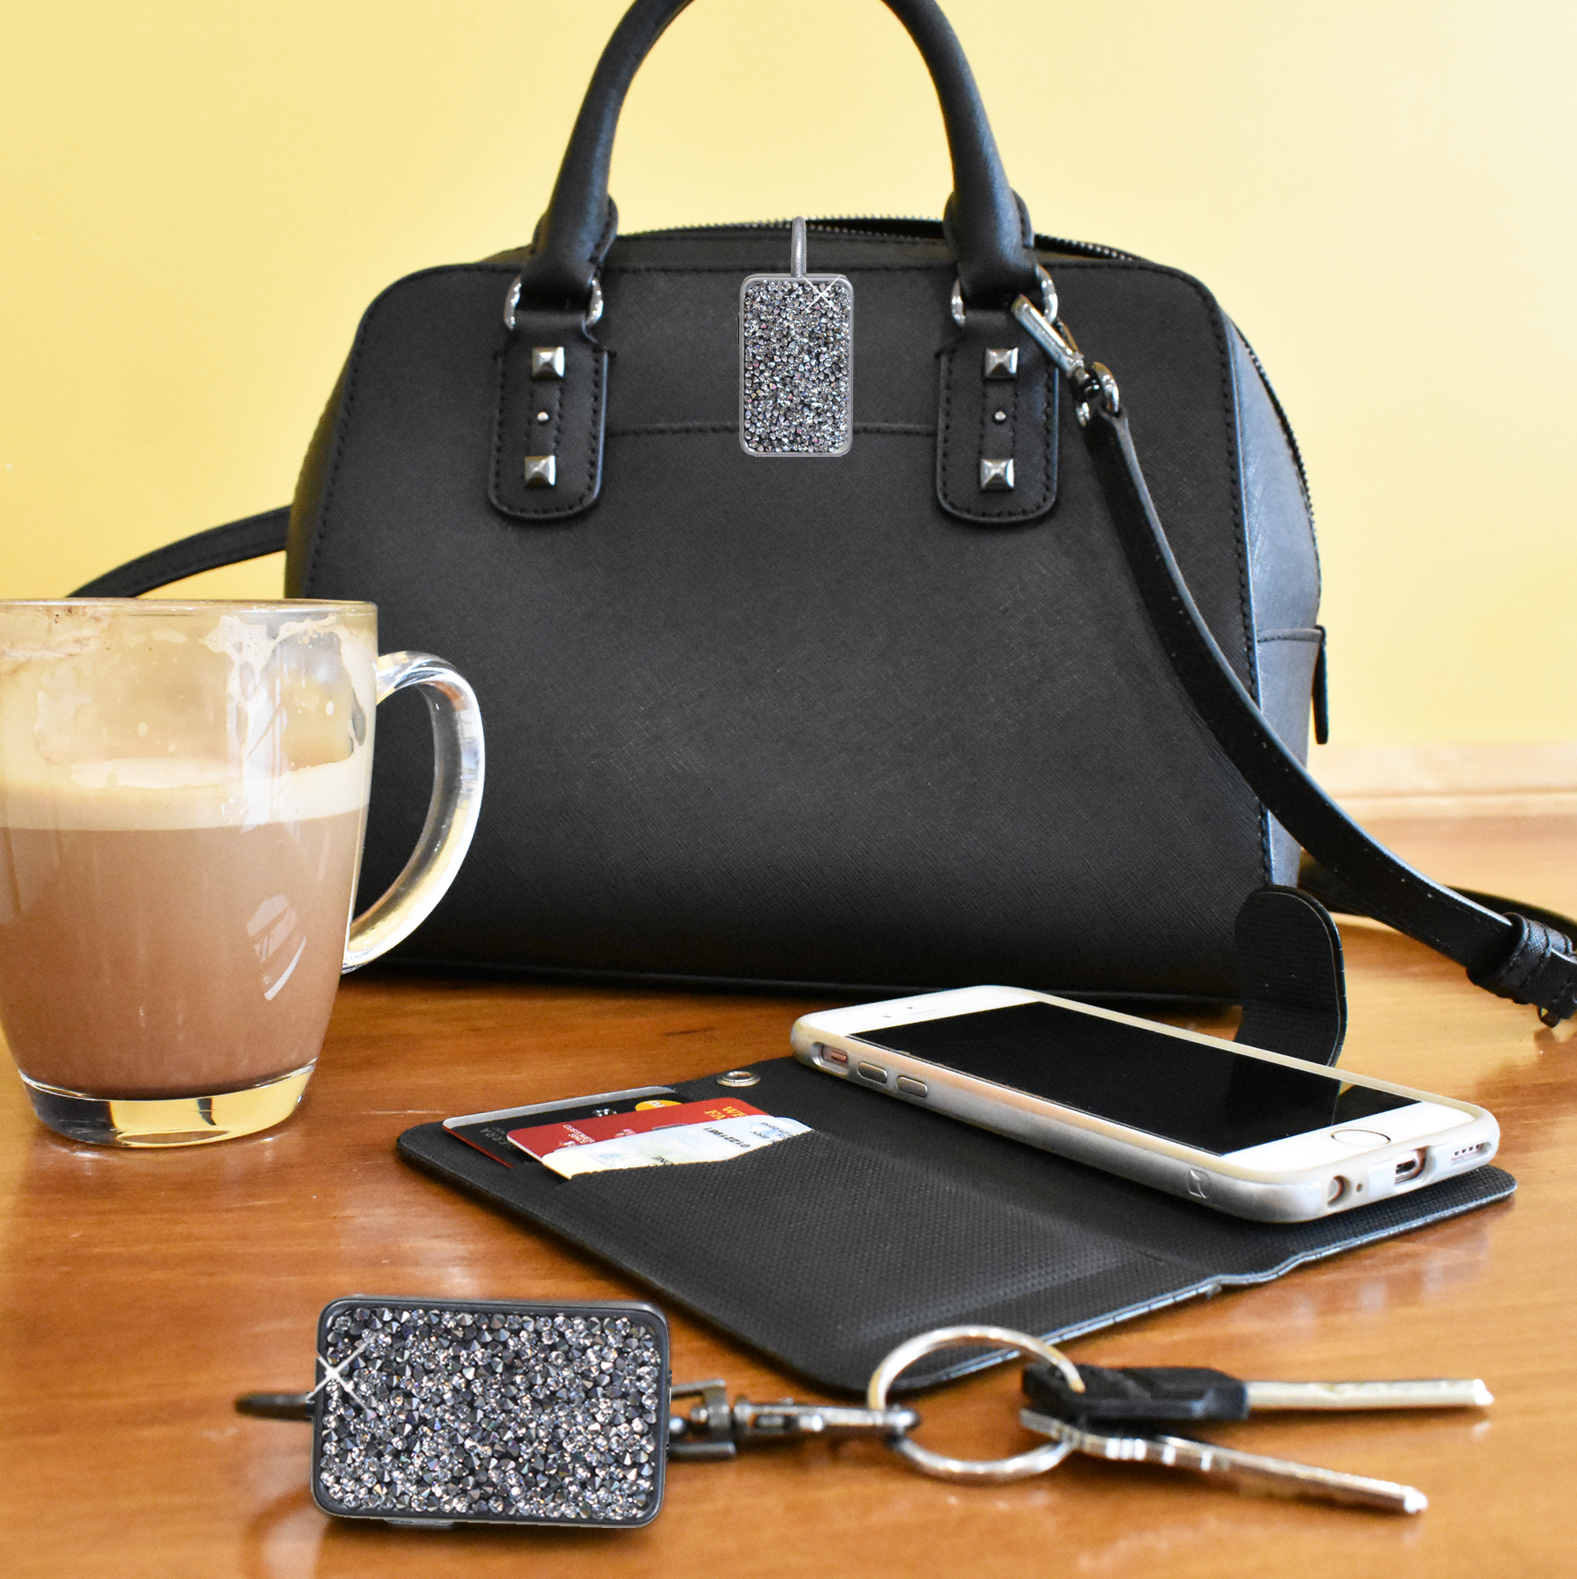 Finders Key Purse Plus™ Brings Safety Into the Bluetooth Tracking Space ...